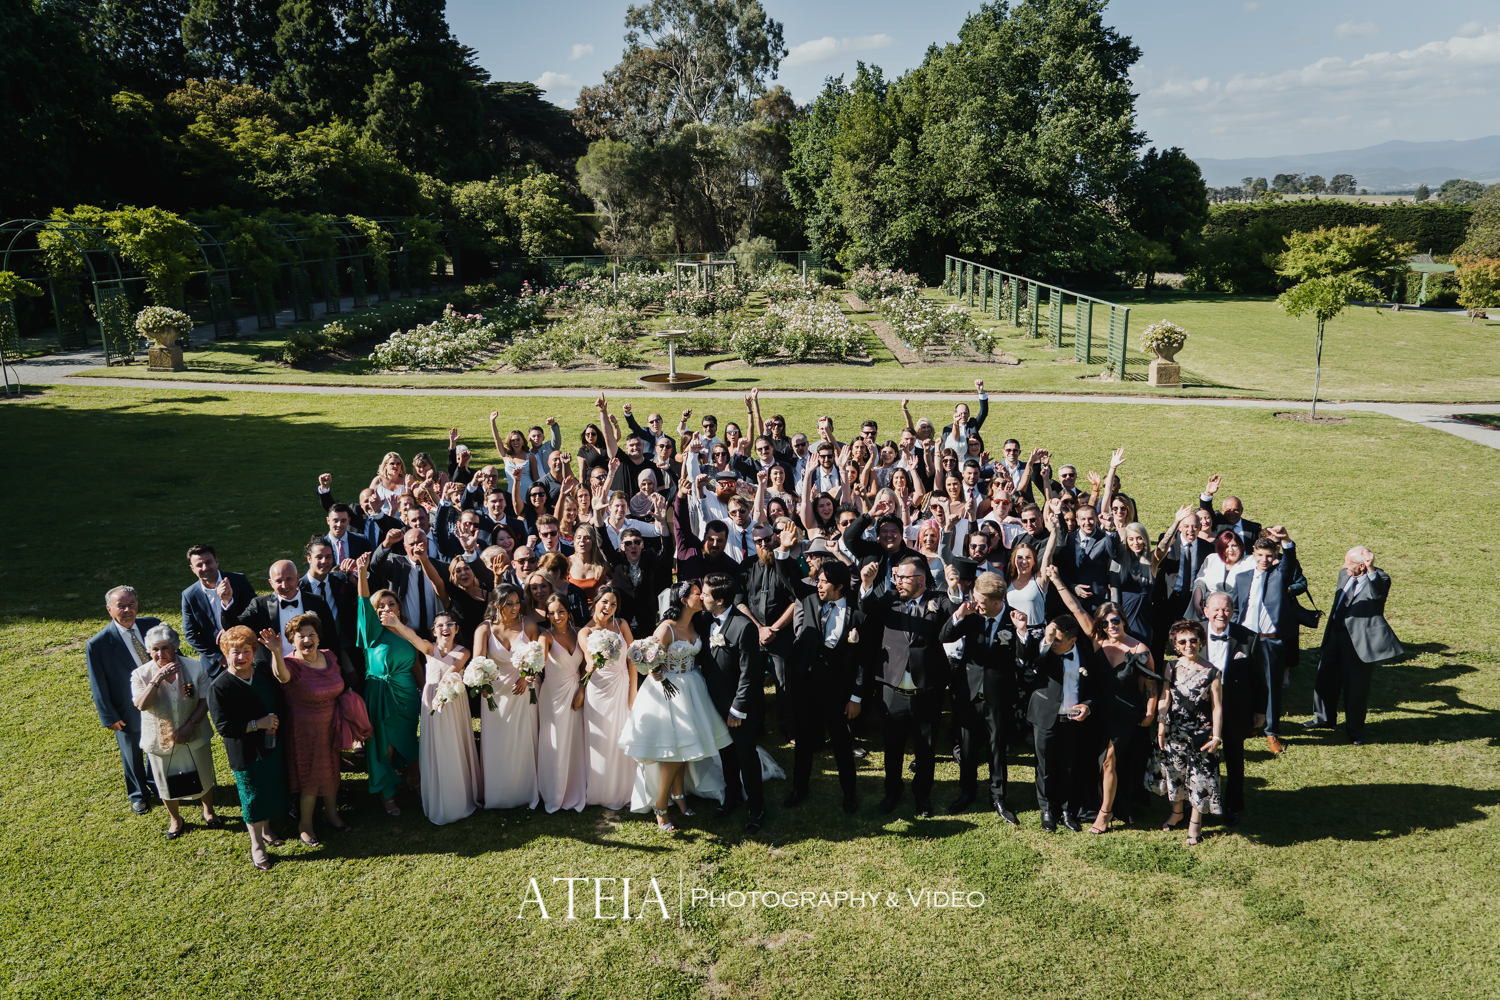 , Coombe Yarra Valley Wedding Photography of Lauren and Christian